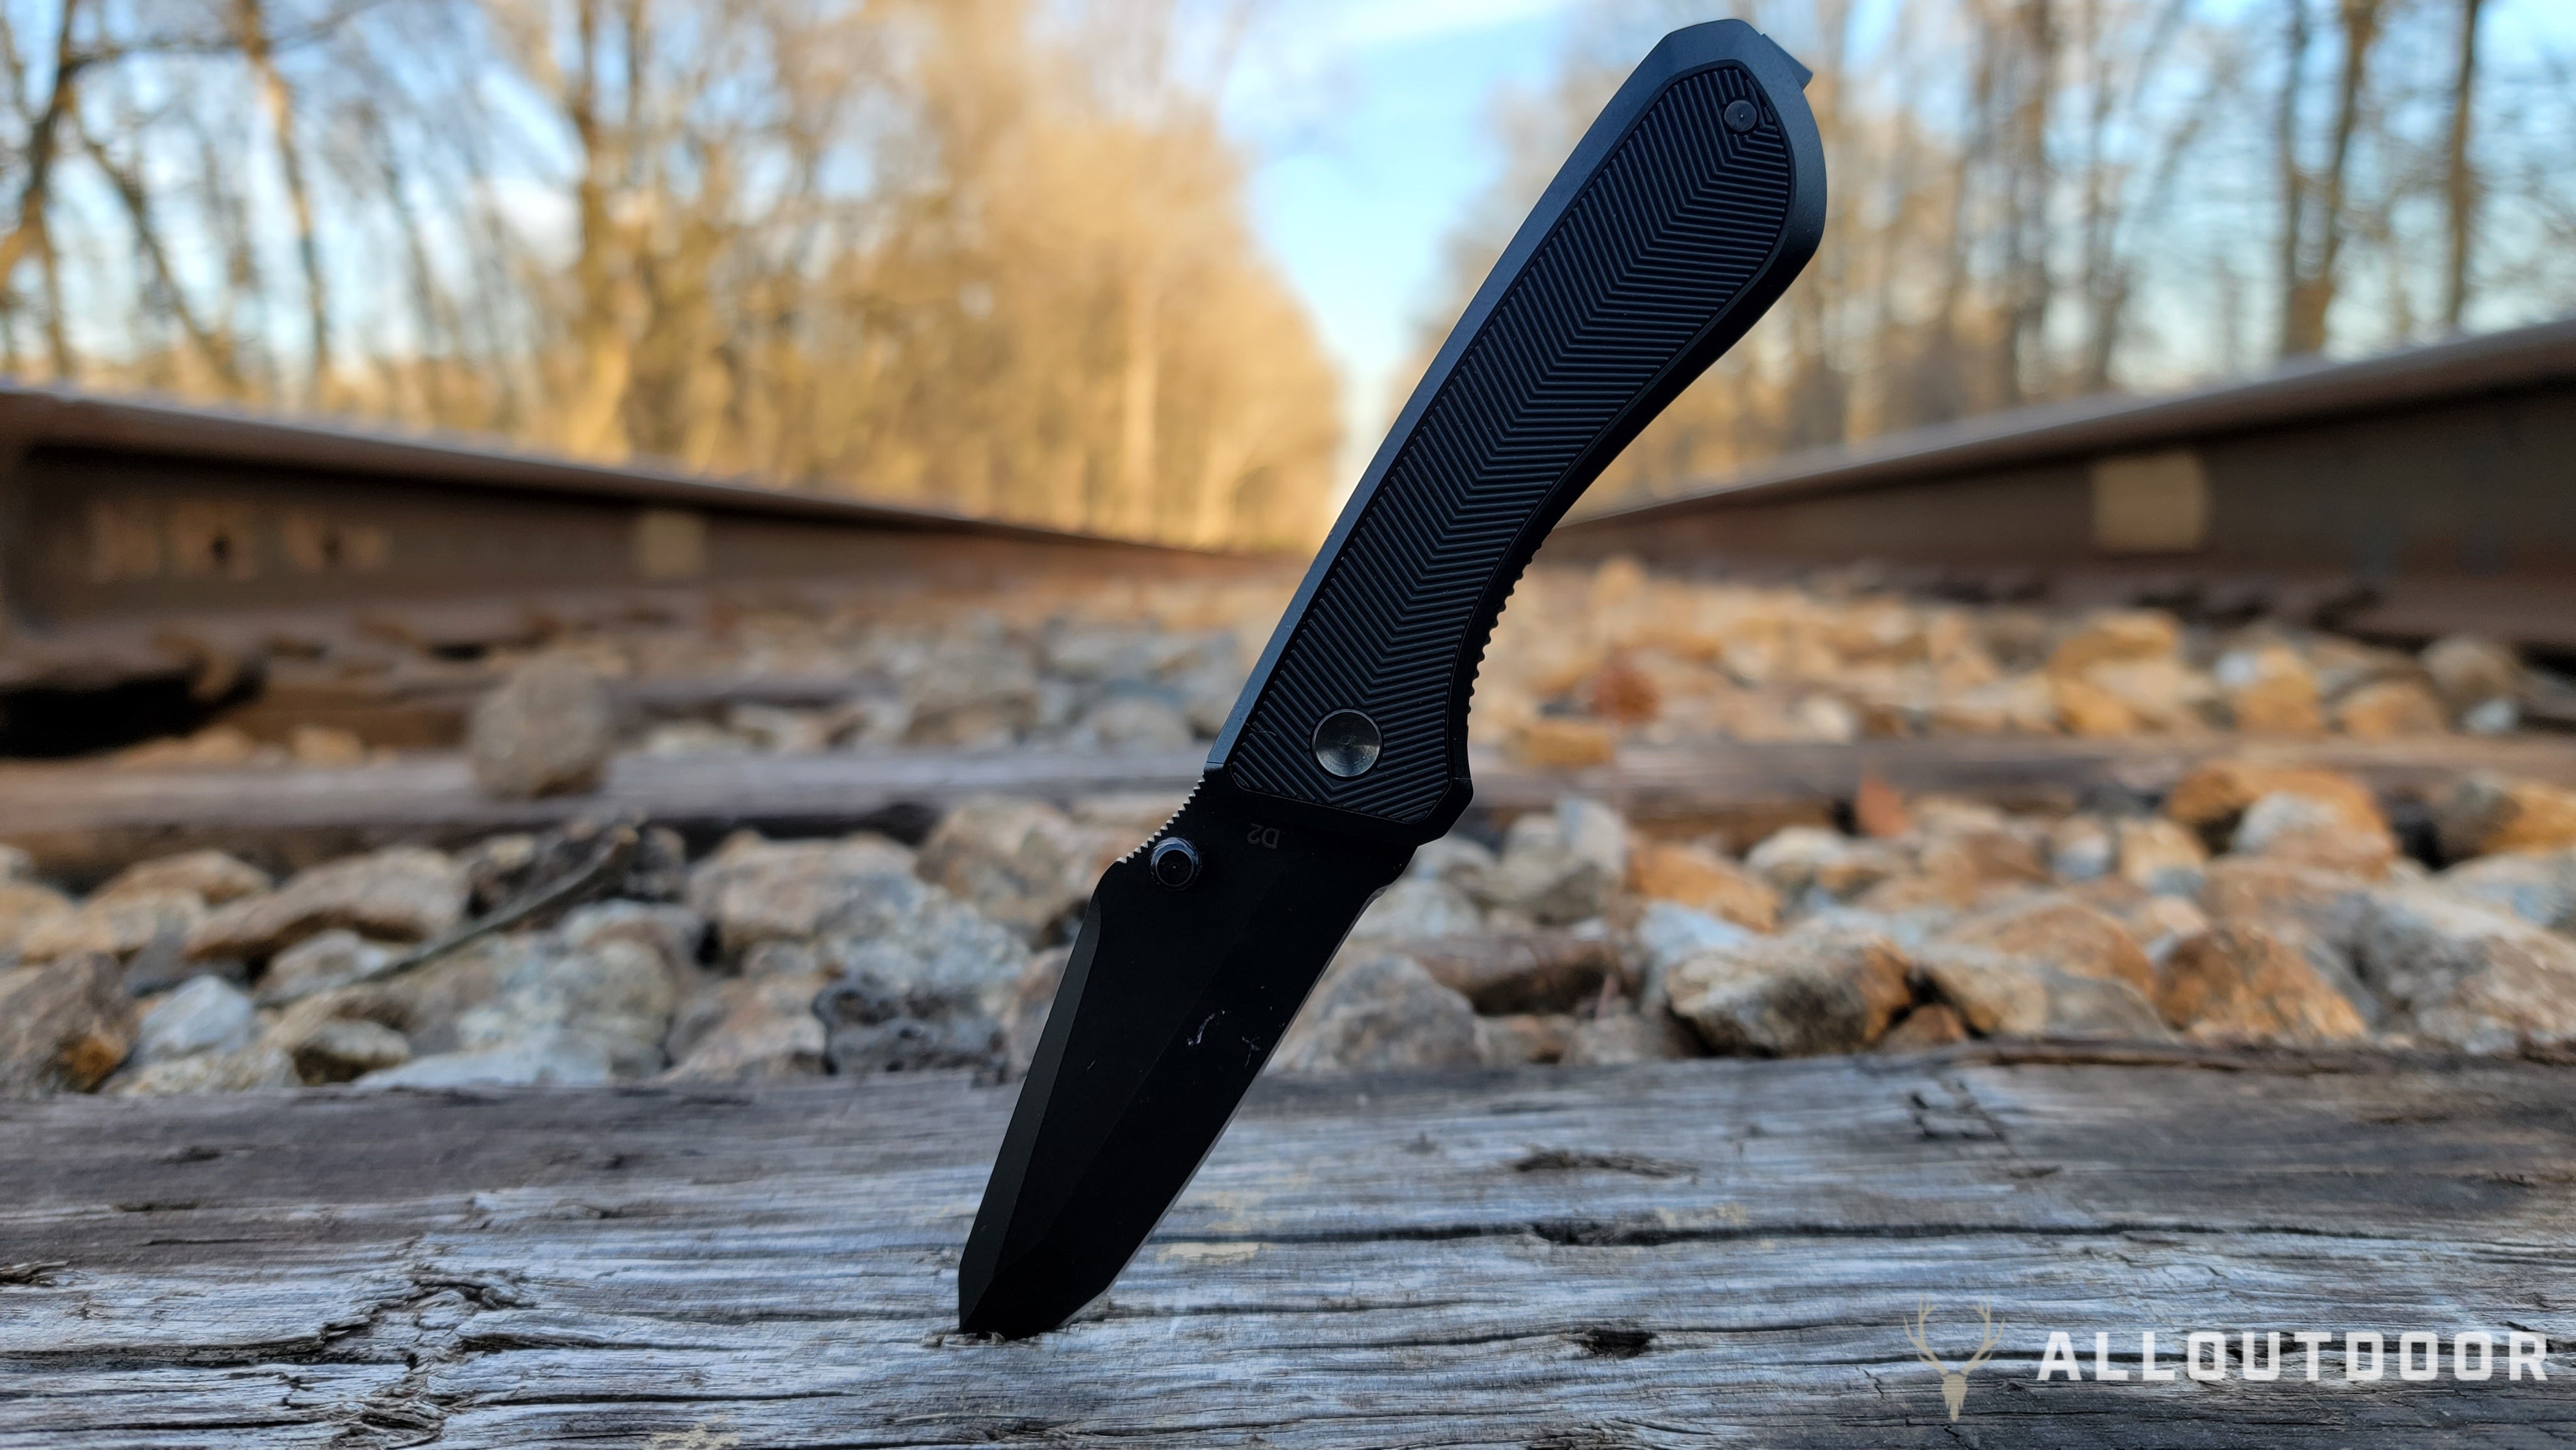 AOD Review: Tyrant Designs TDC002 EDC Tactical Pocket Knife